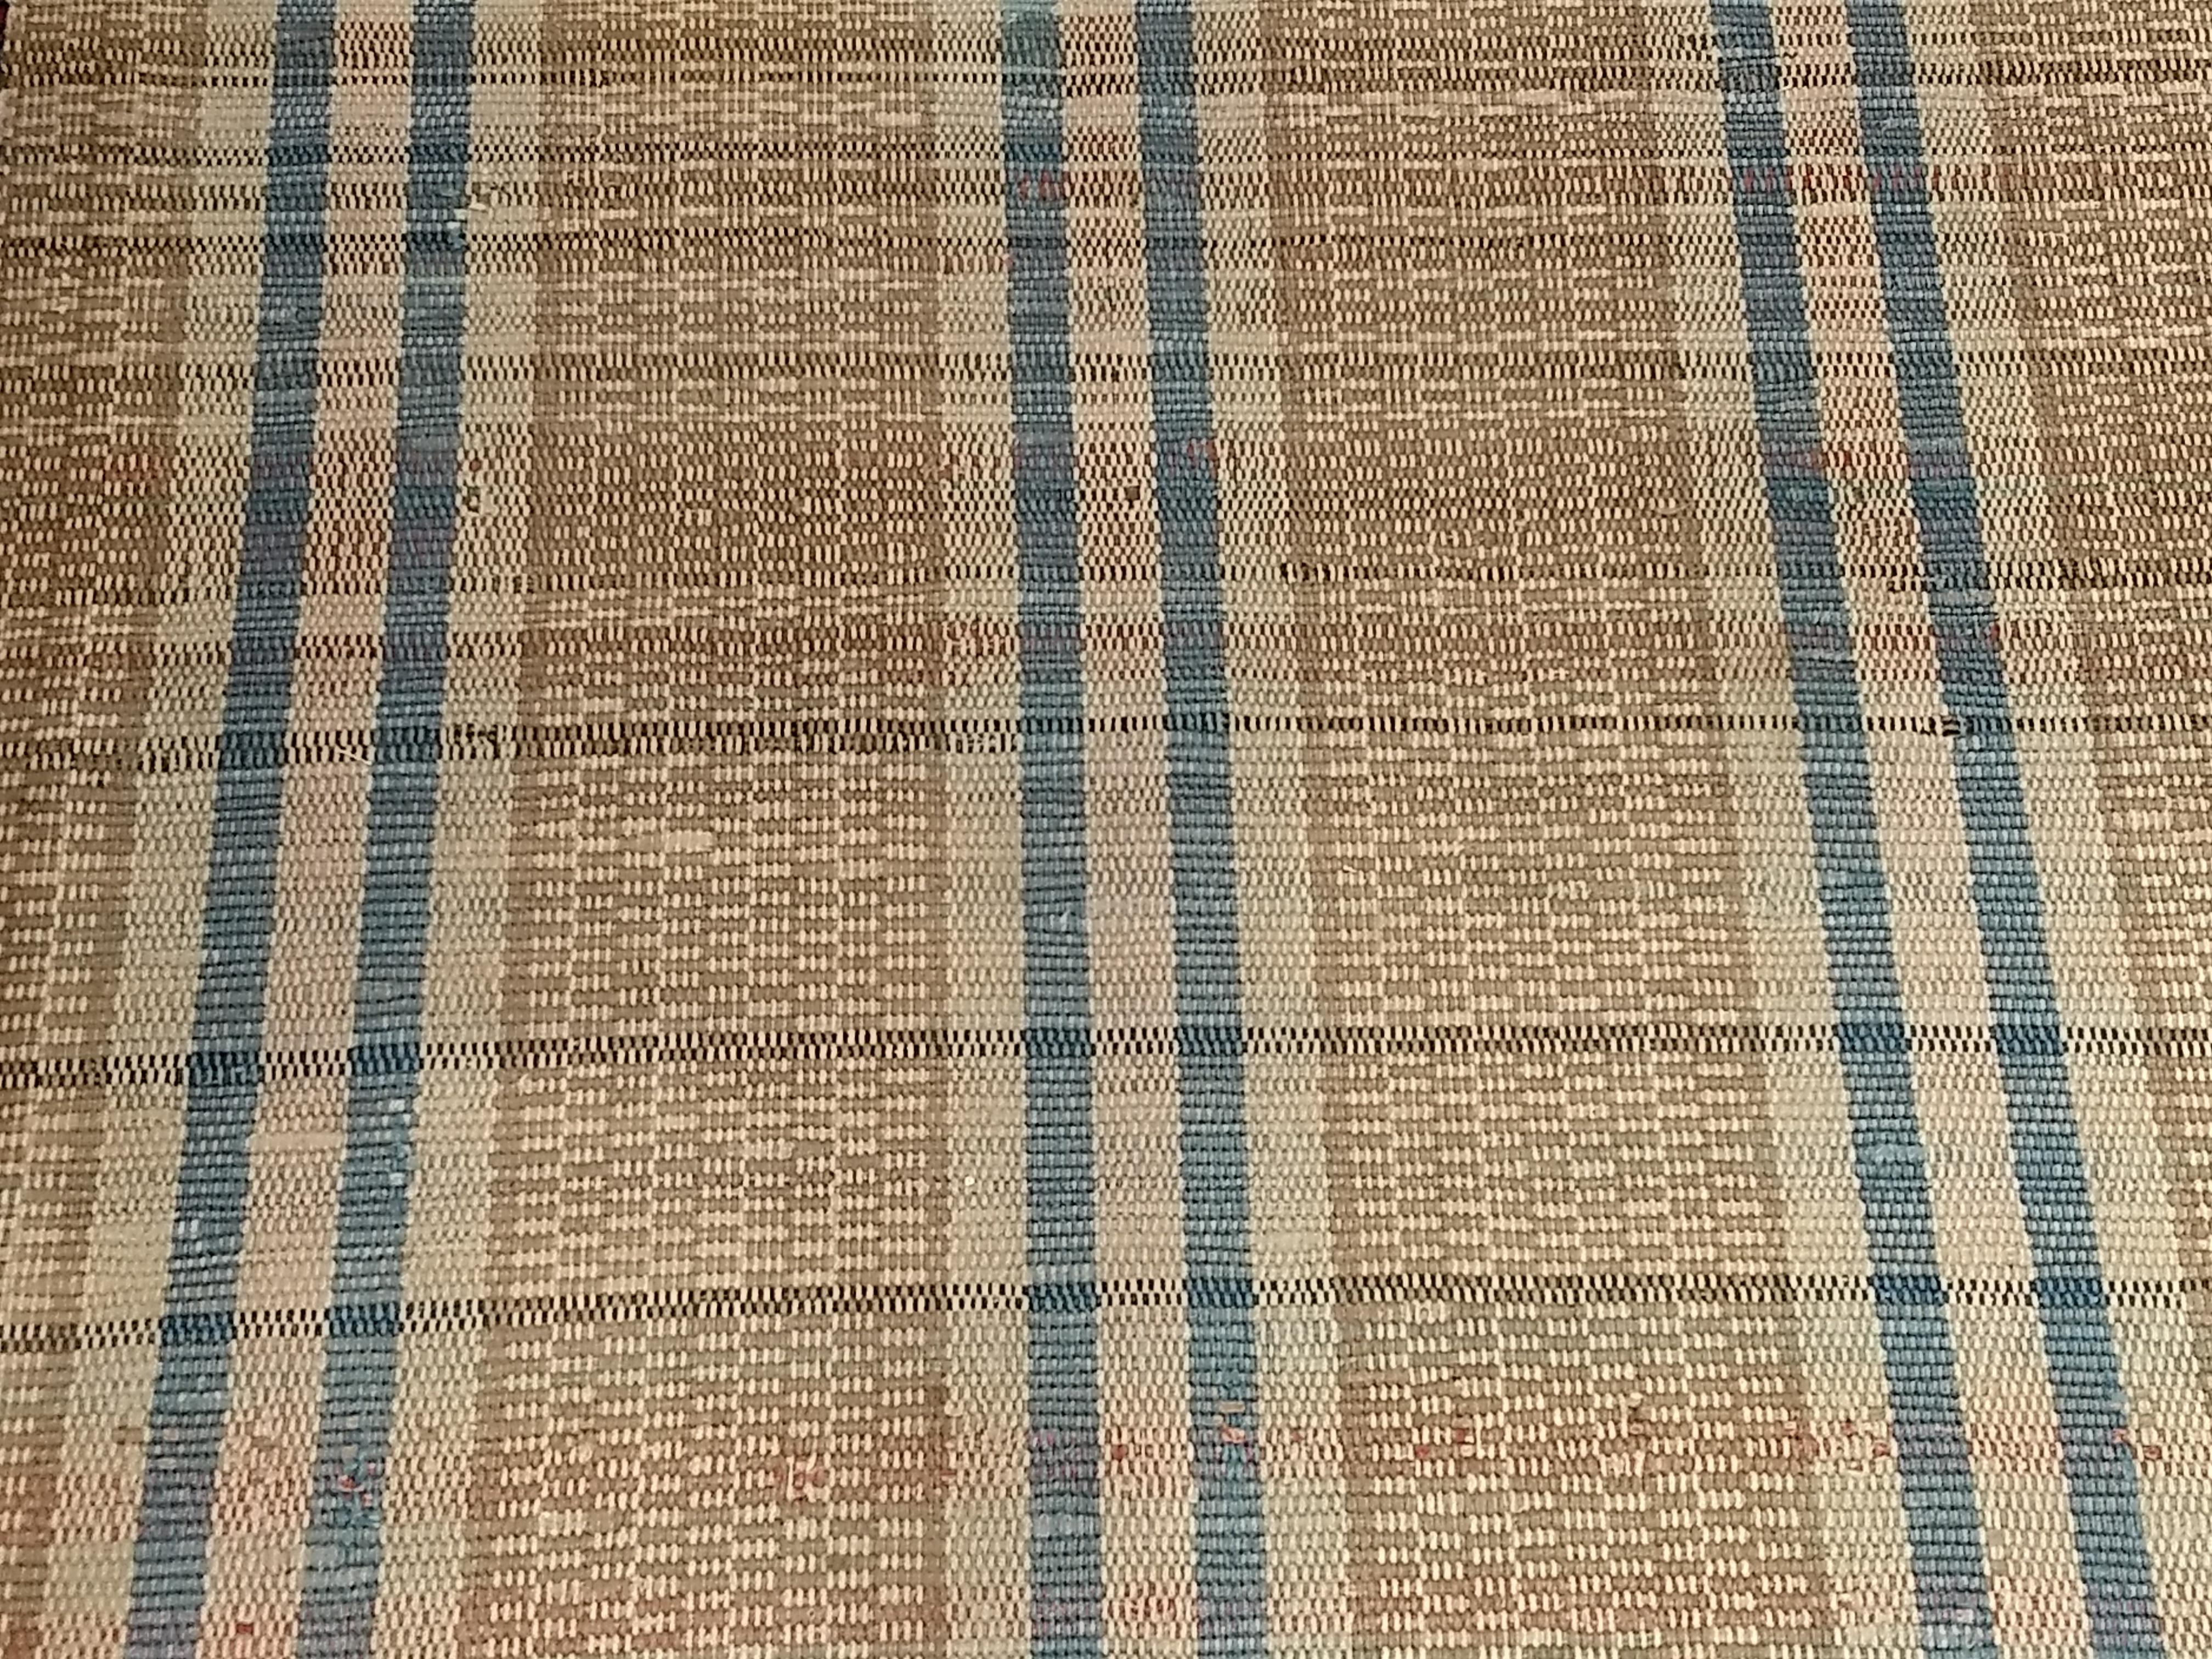 Vintage Hand-Woven American Amish Rag Runner in Pale Blue, Pink, Wheat, Caramel For Sale 3